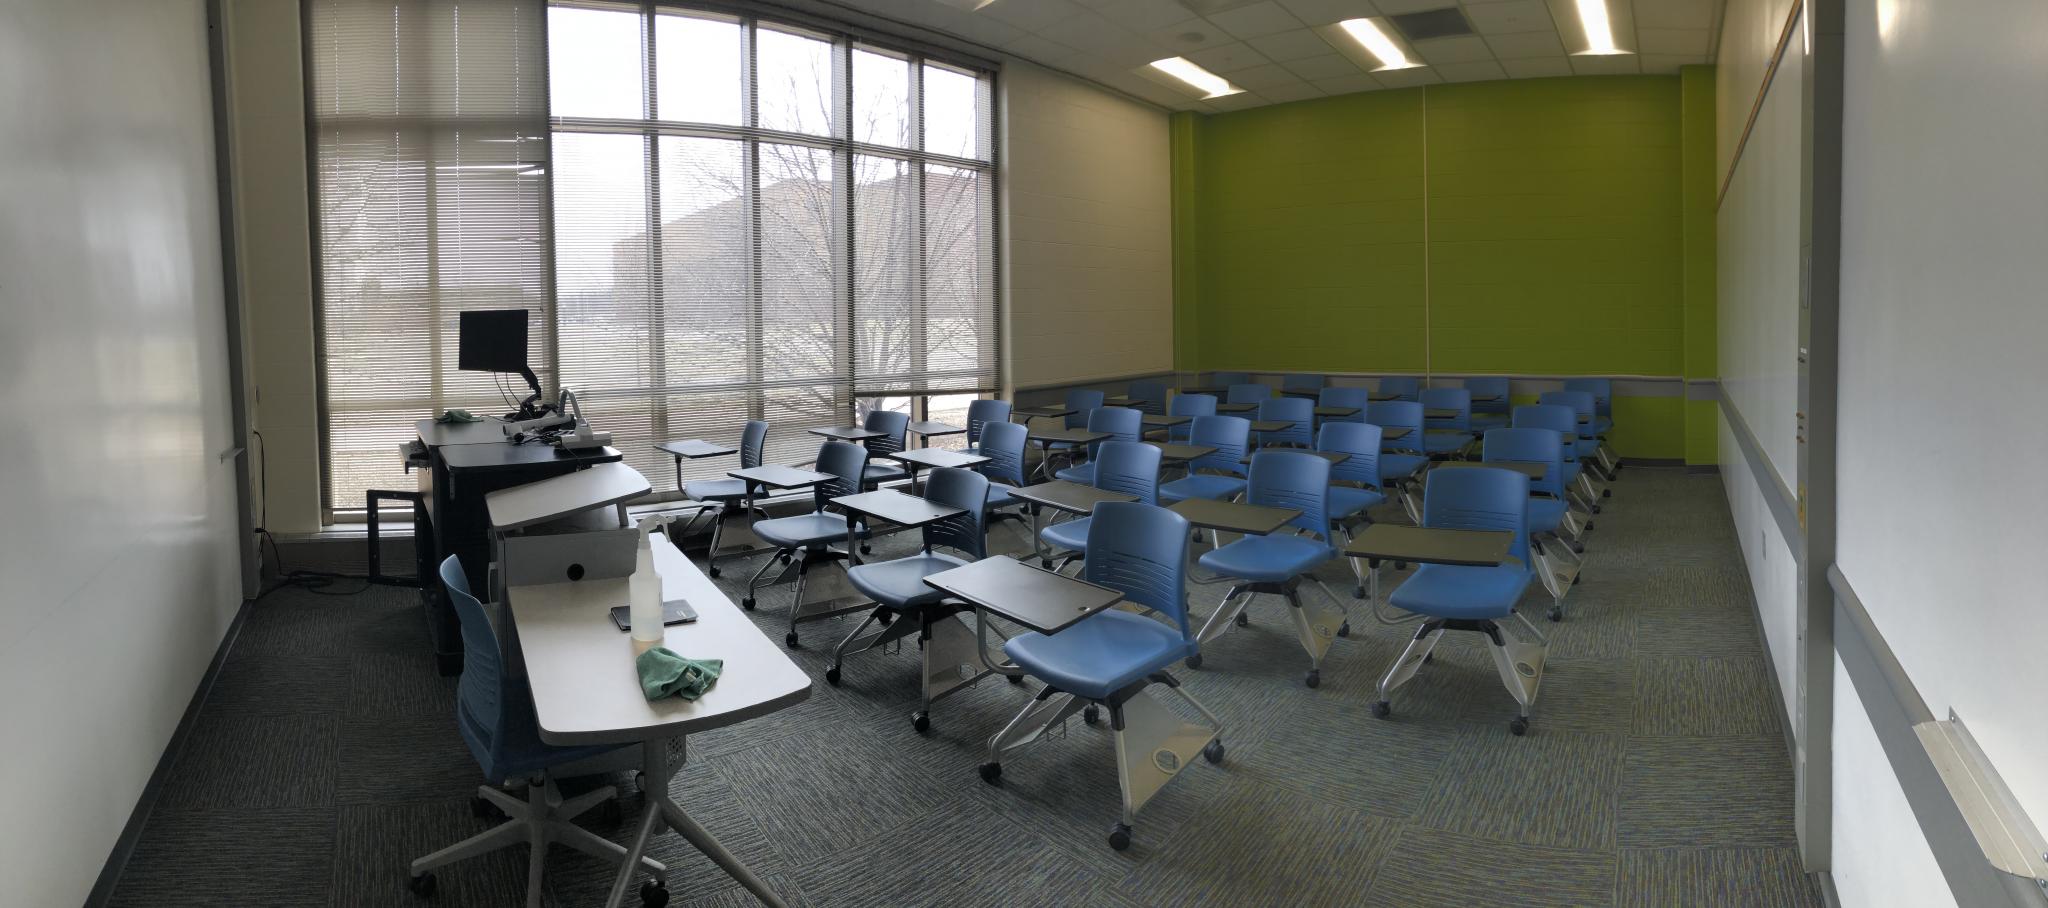 photo of classroom with large windows